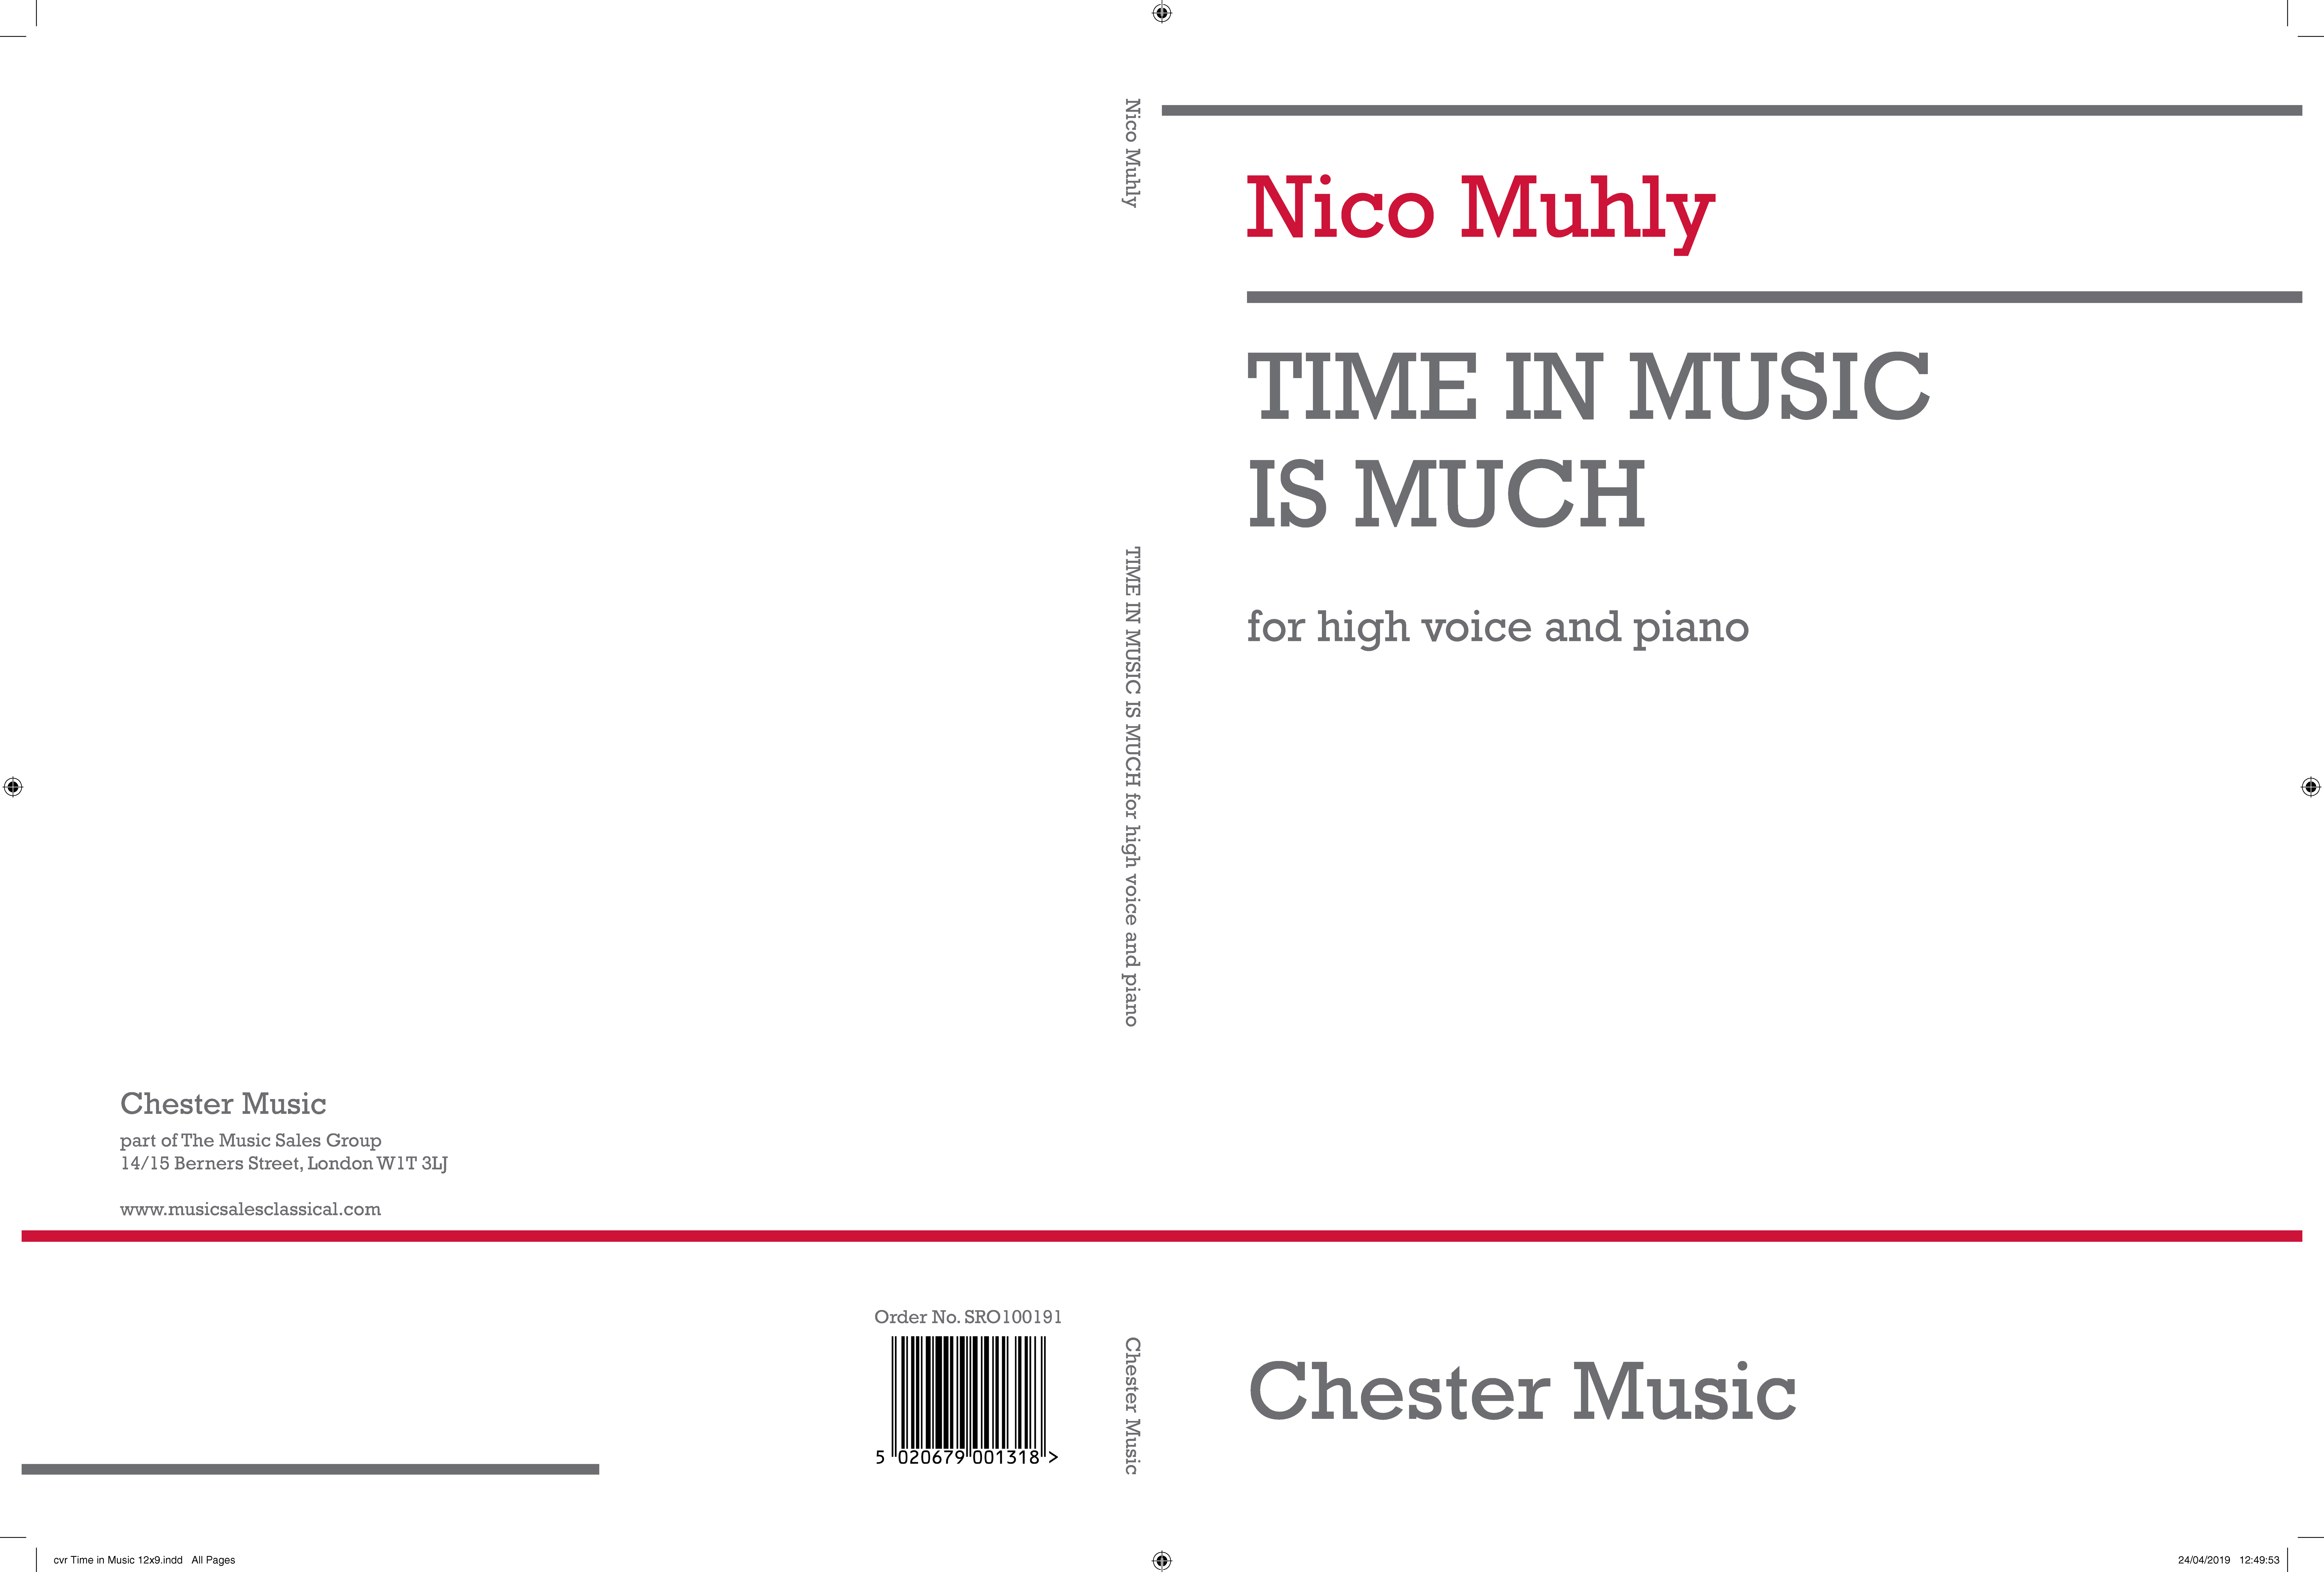 Nico Muhly: Time in Music is Much